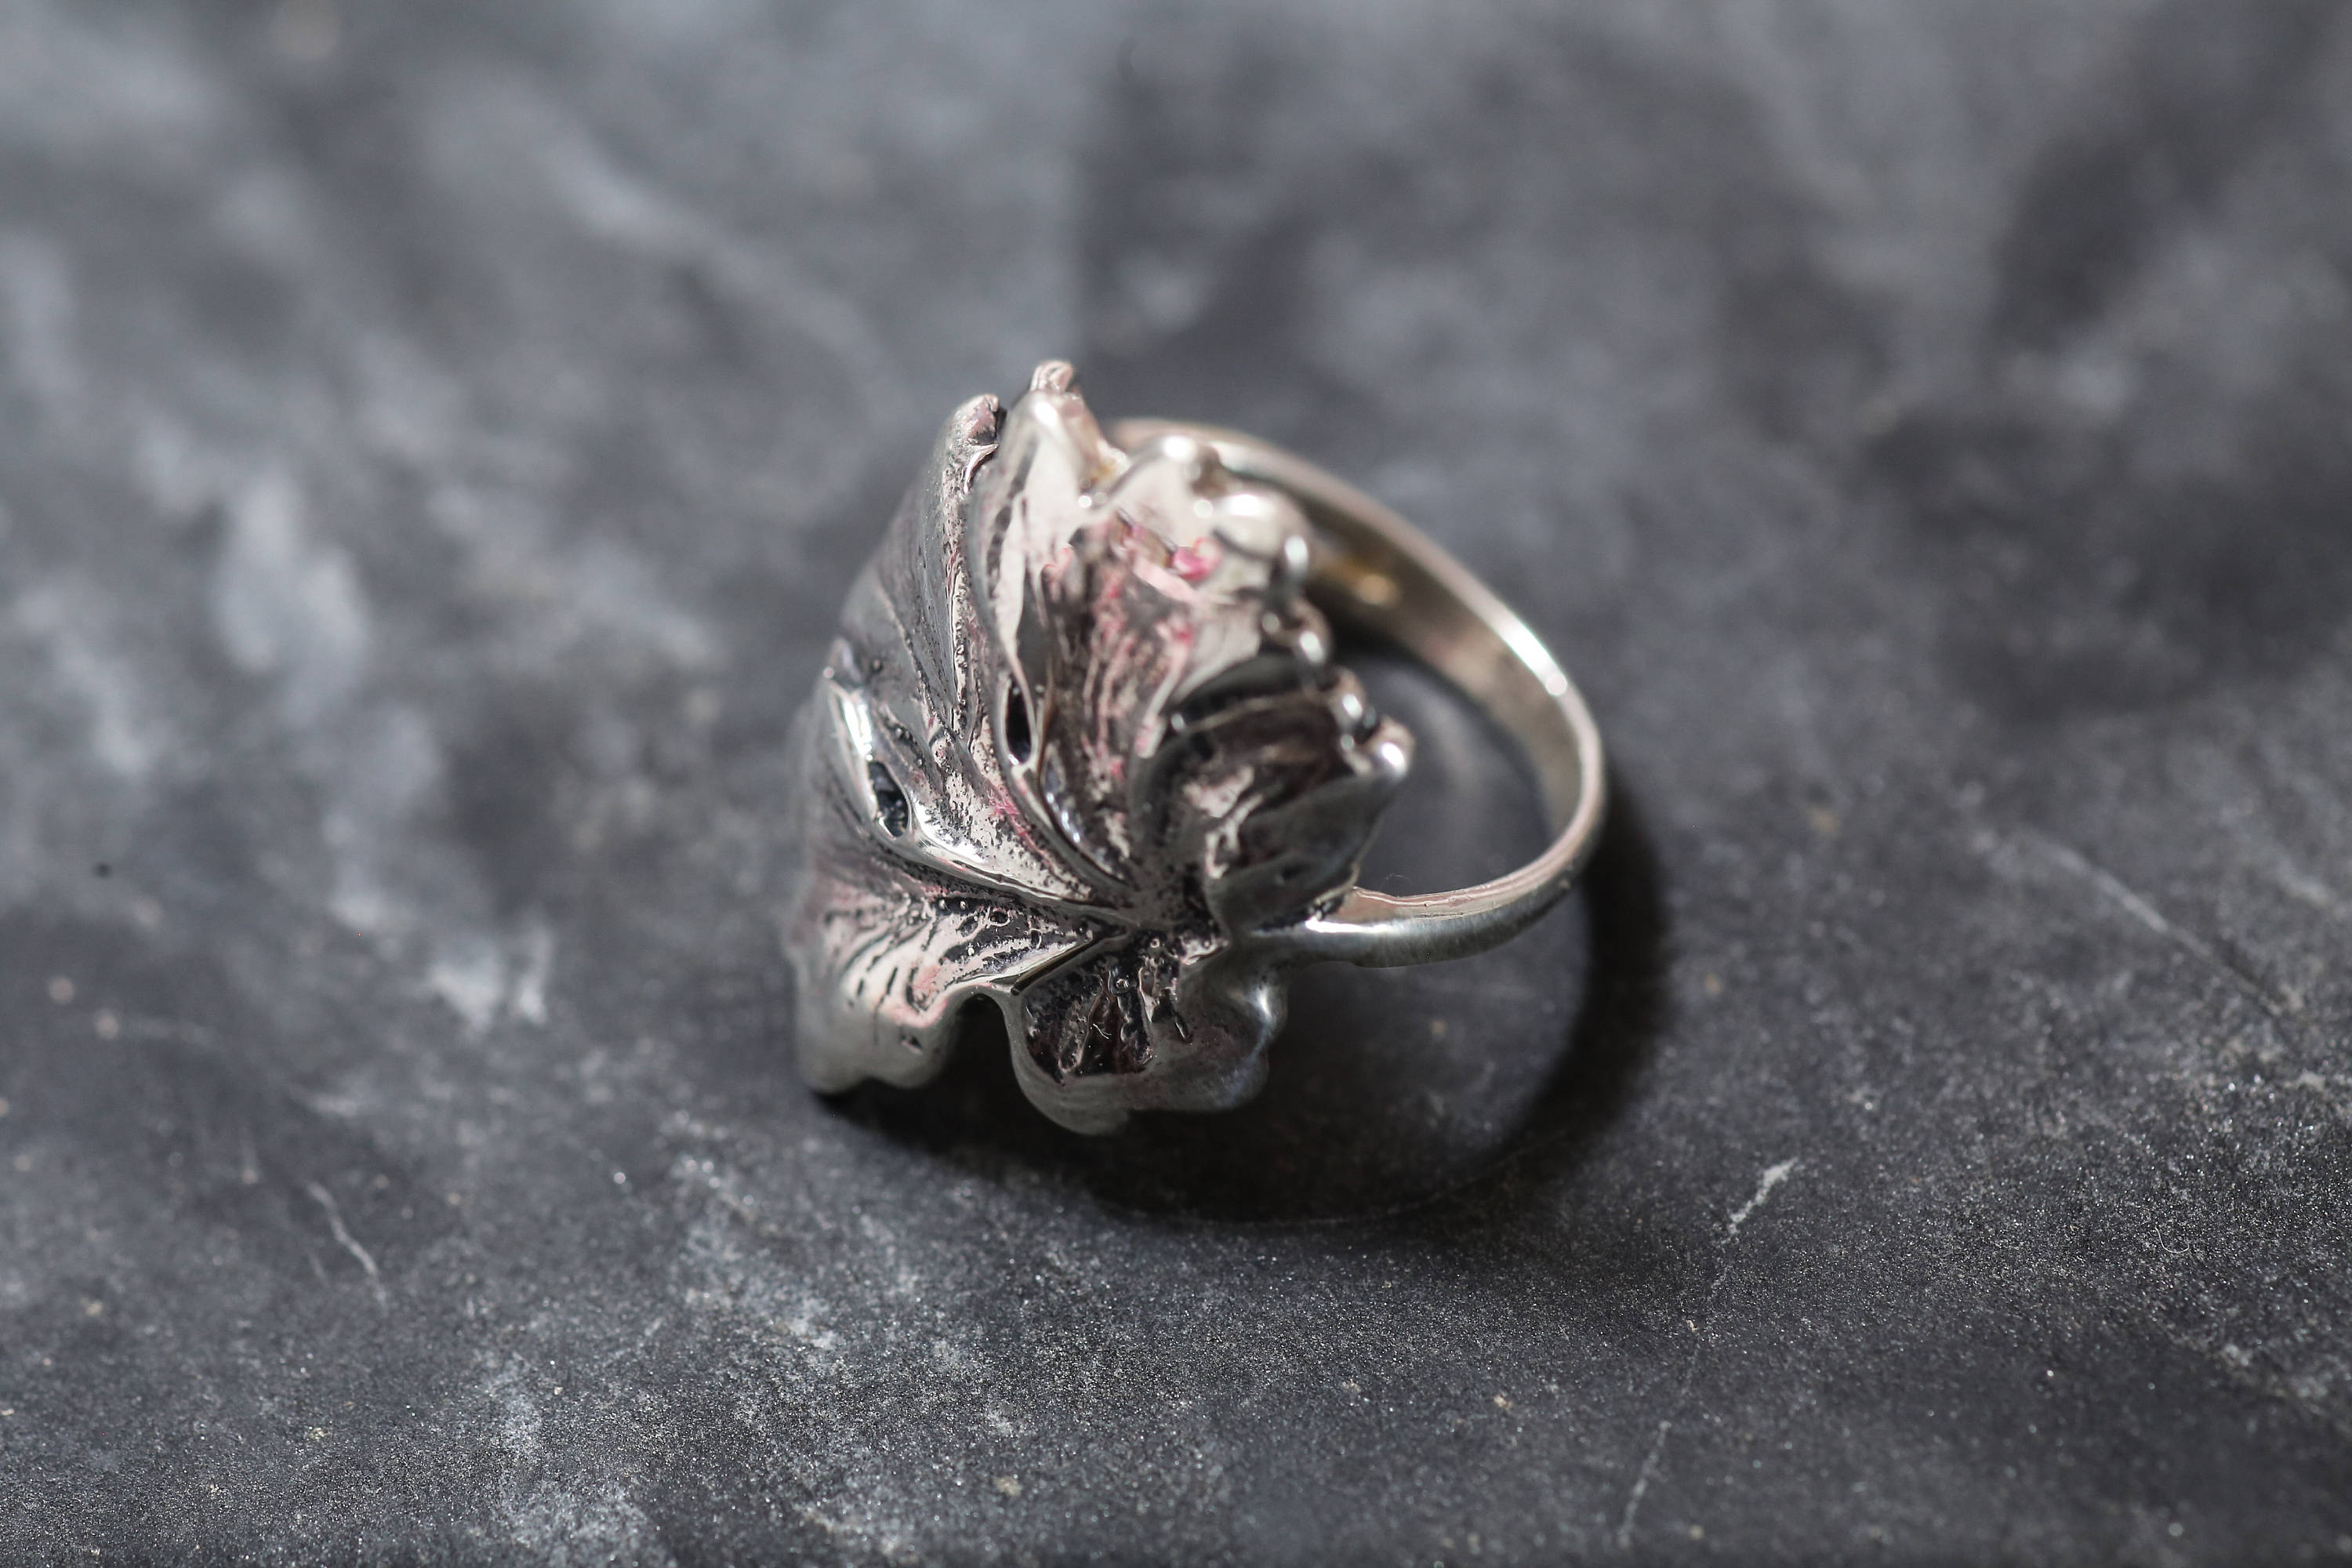 Leaf Ring, Silver Leaf Ring, Solid Silver Ring, Statement Ring, Unique Silver Ring, Art Ring, Interesting Ring, Sterling Silver Ring, Leaf